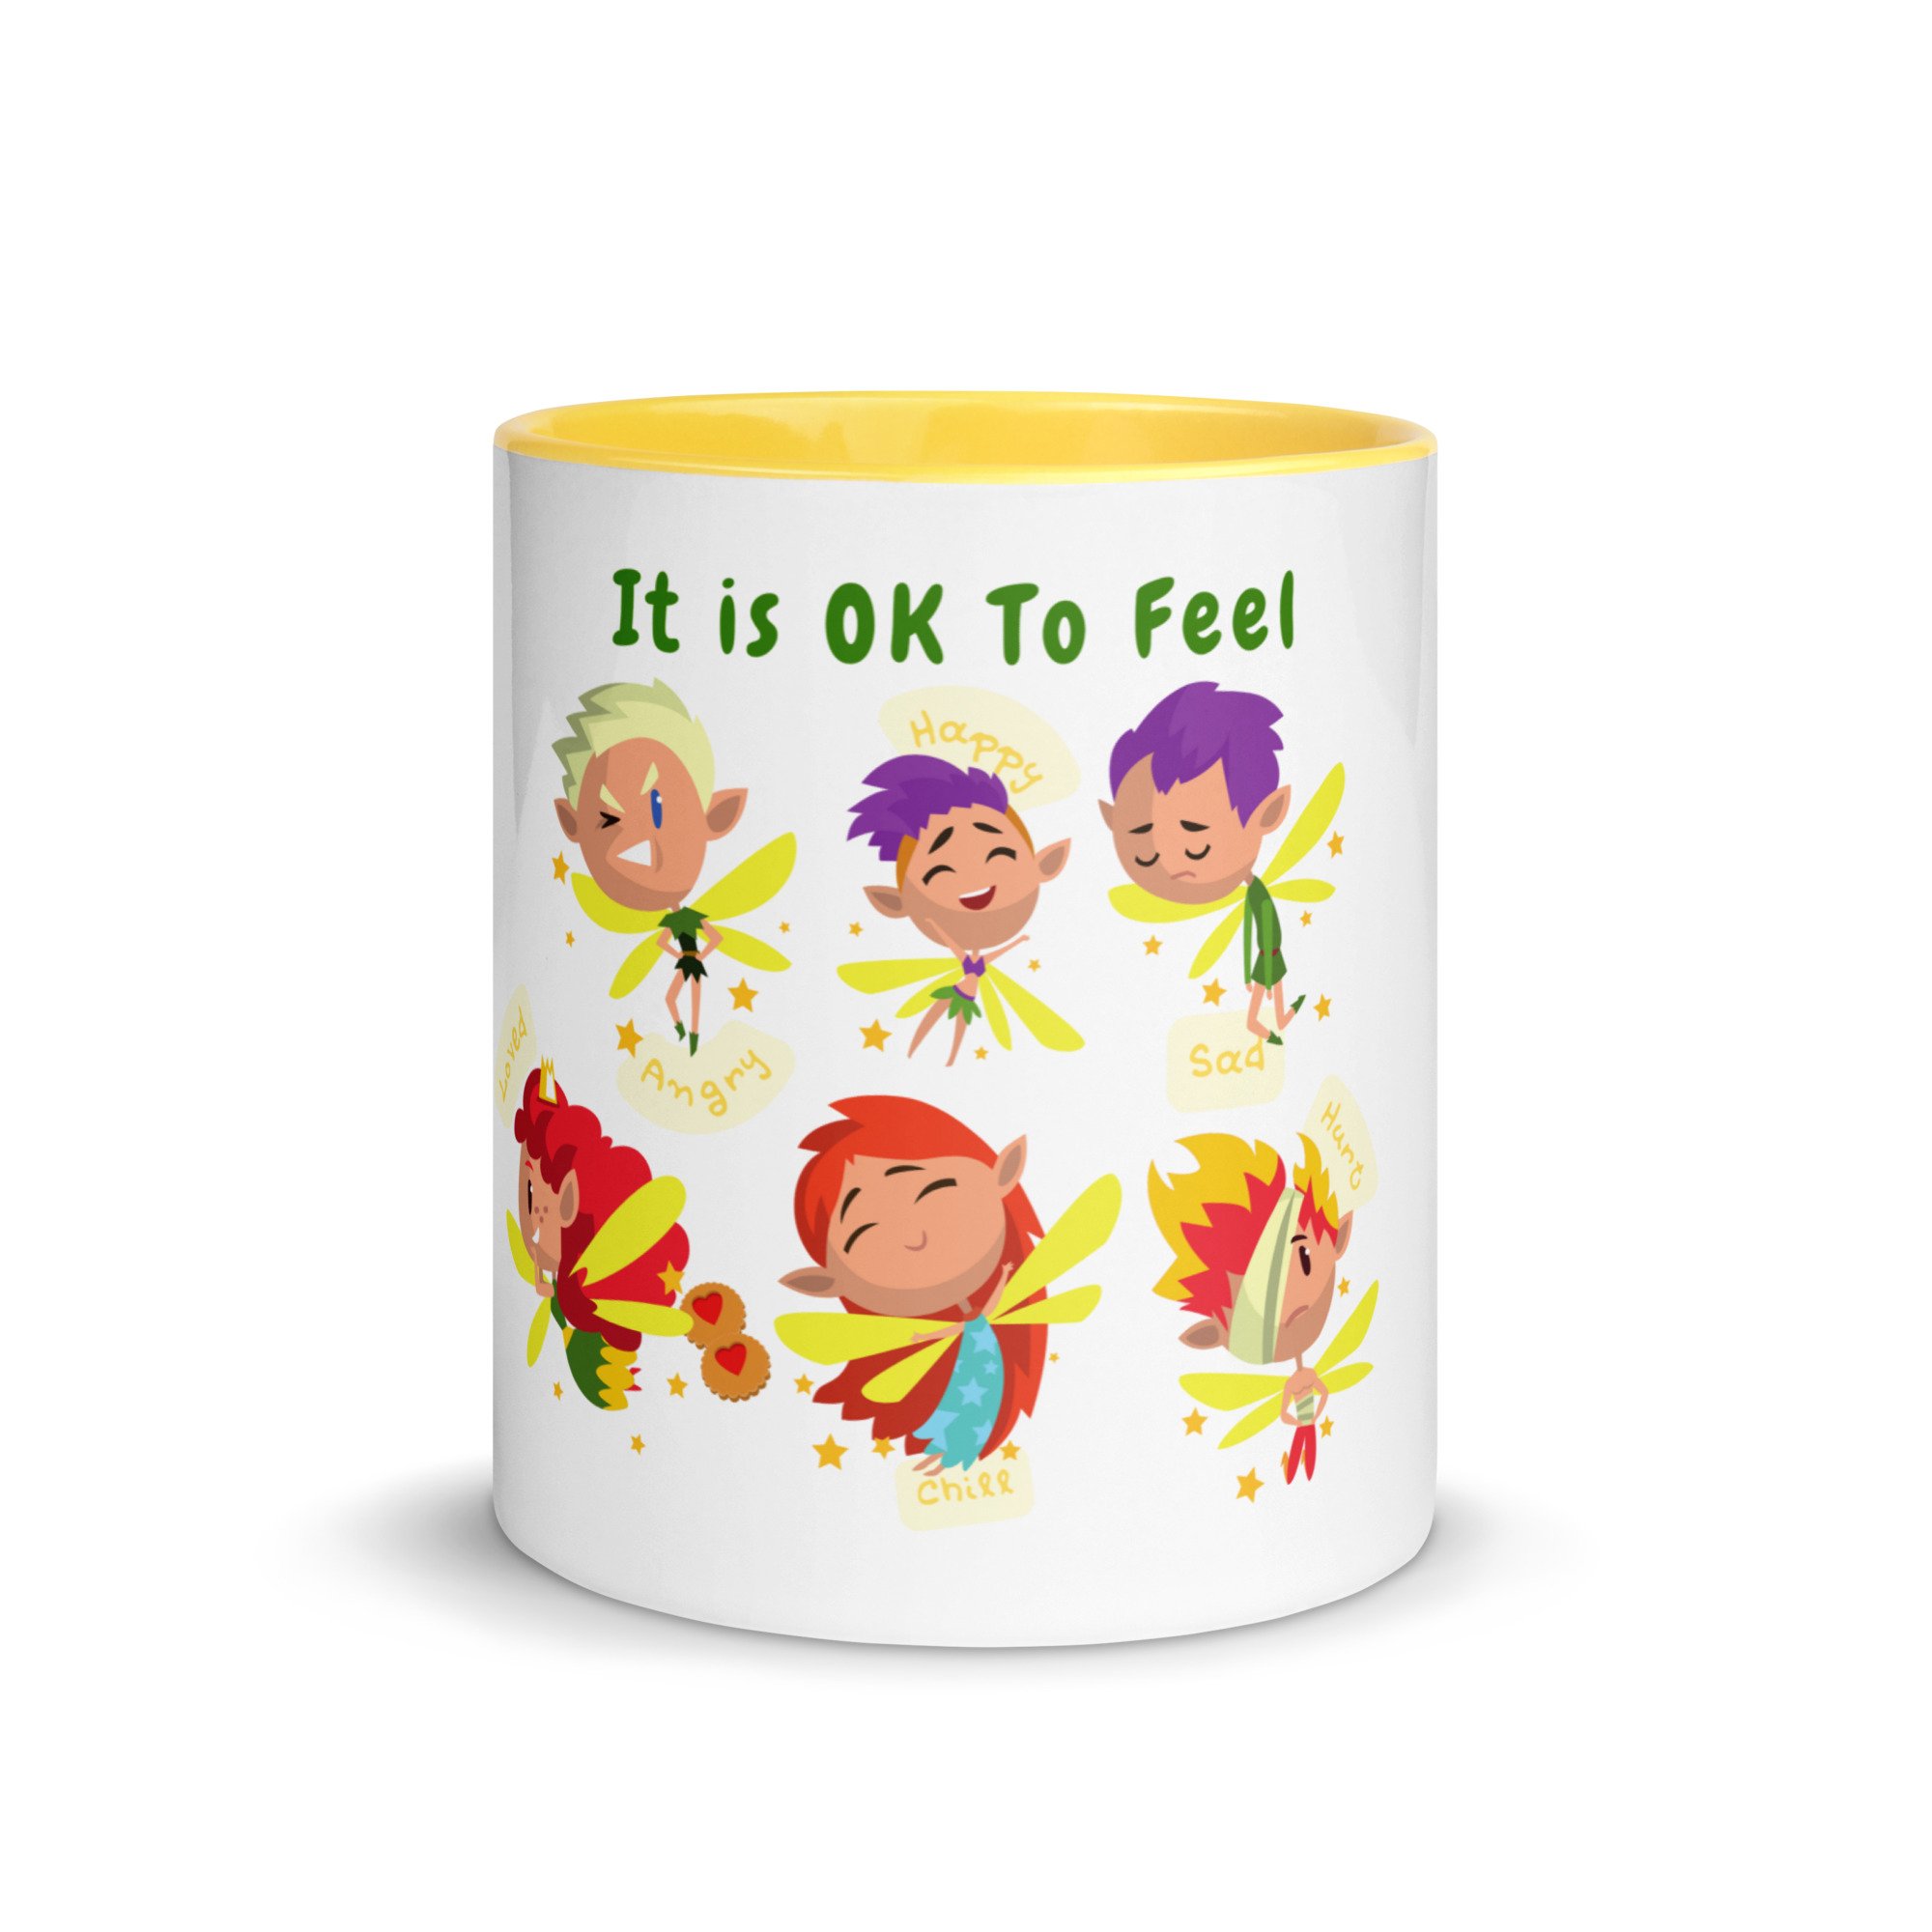 white-ceramic-mug-with-color-inside-yellow-11-oz-front-656360920bb1d.jpg